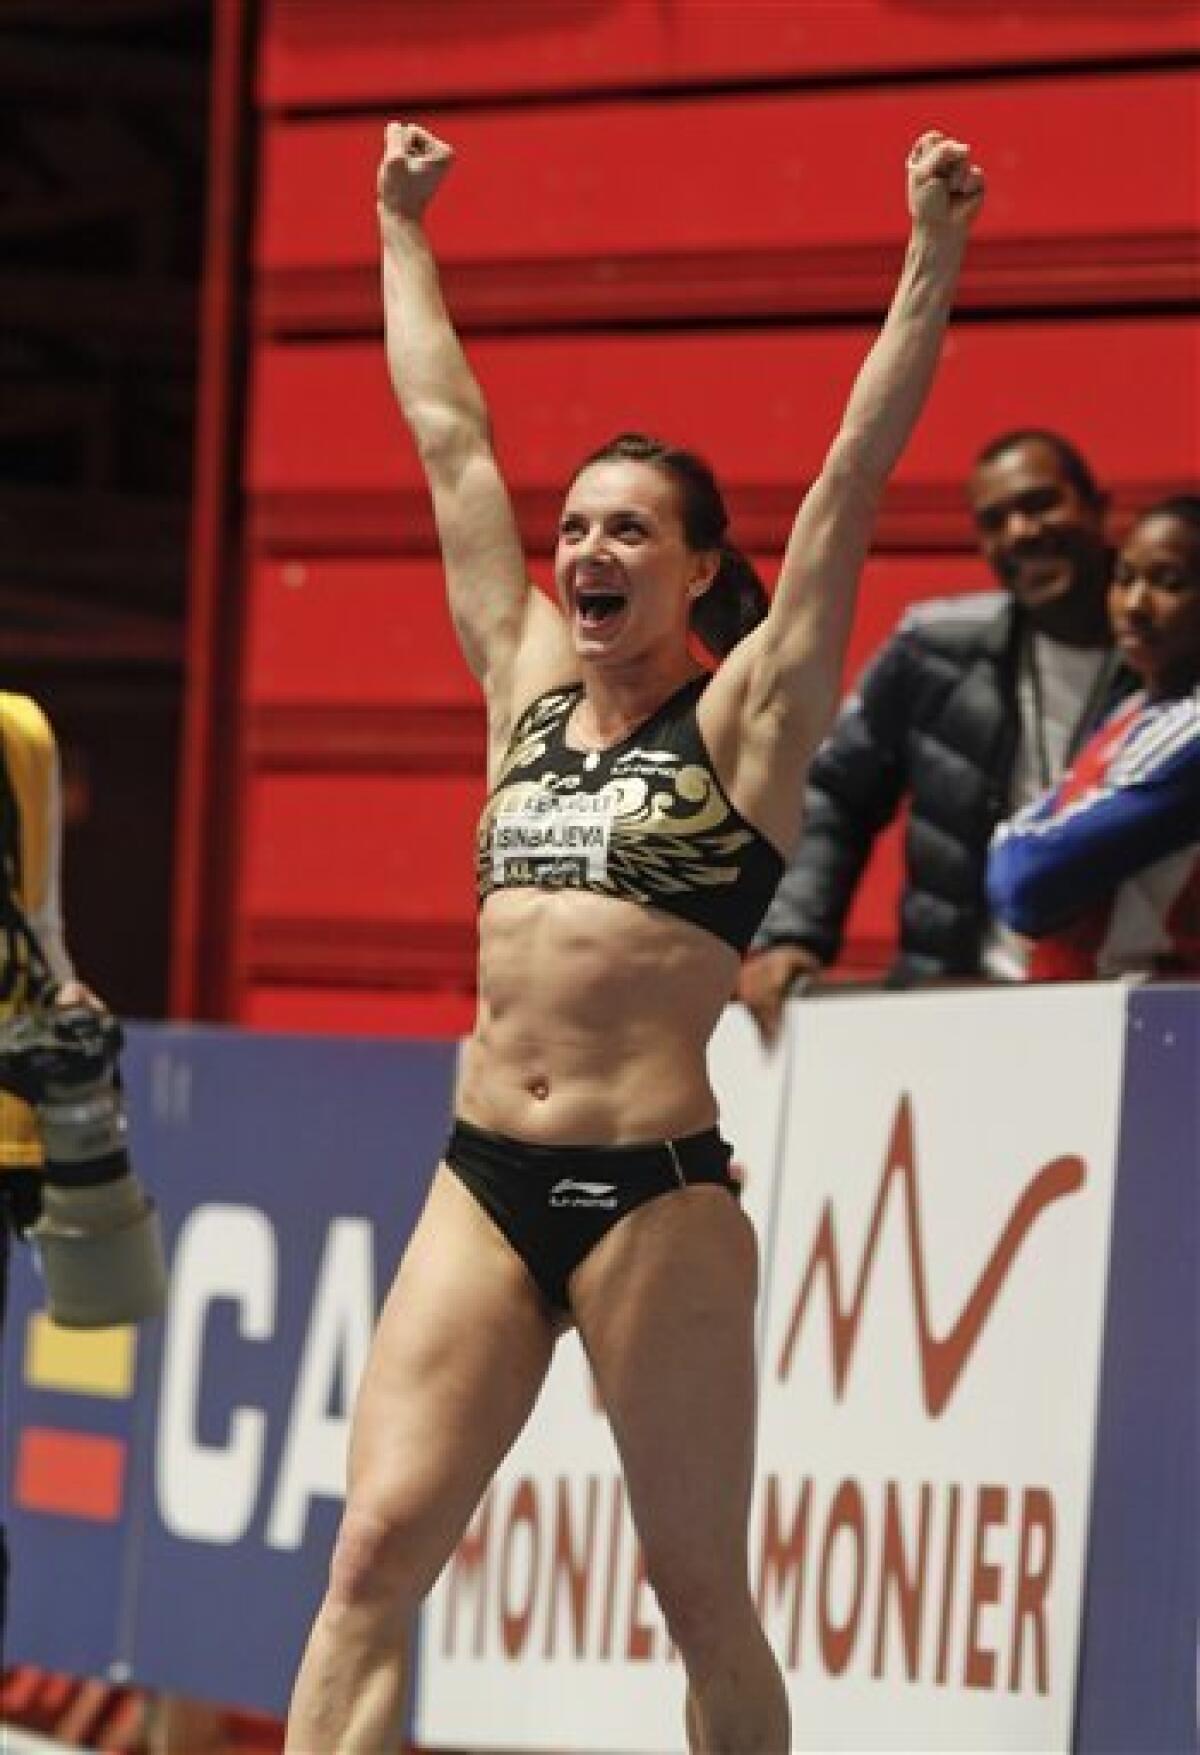 Yelena Isinbayeva of Russia reacts as she wins the women's pole vault during the XL-Galan Indoor athletics meeting in Stockholm, Sweden, Thursday Feb. 23, 2012. (AP Photo / Fredrick Persson) SWEDEN OUT